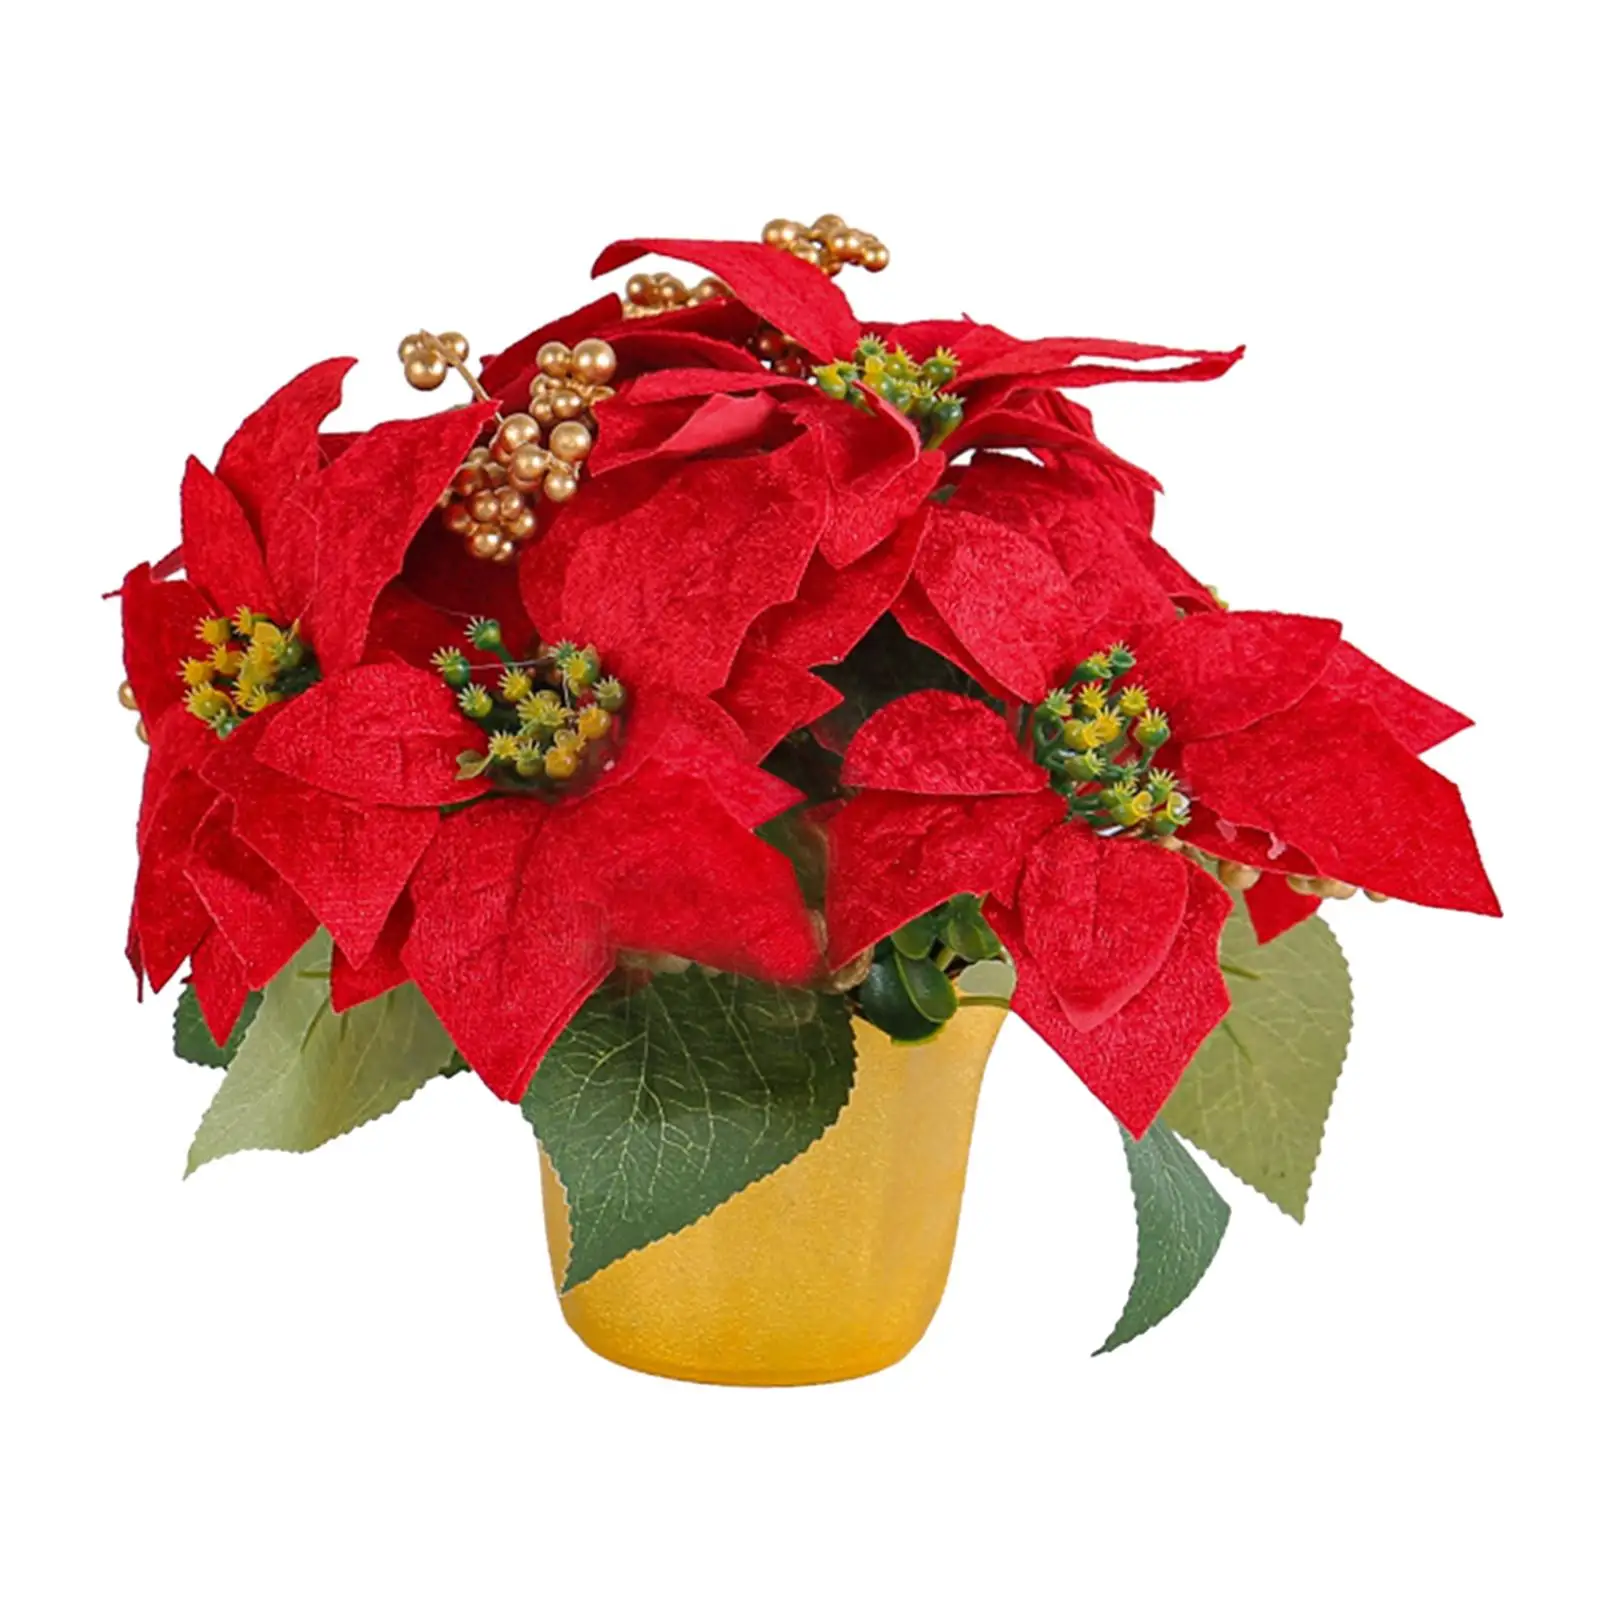 Potted Red Poinsettia Christmas Artificial Red Poinsettia Plant for Tabletop